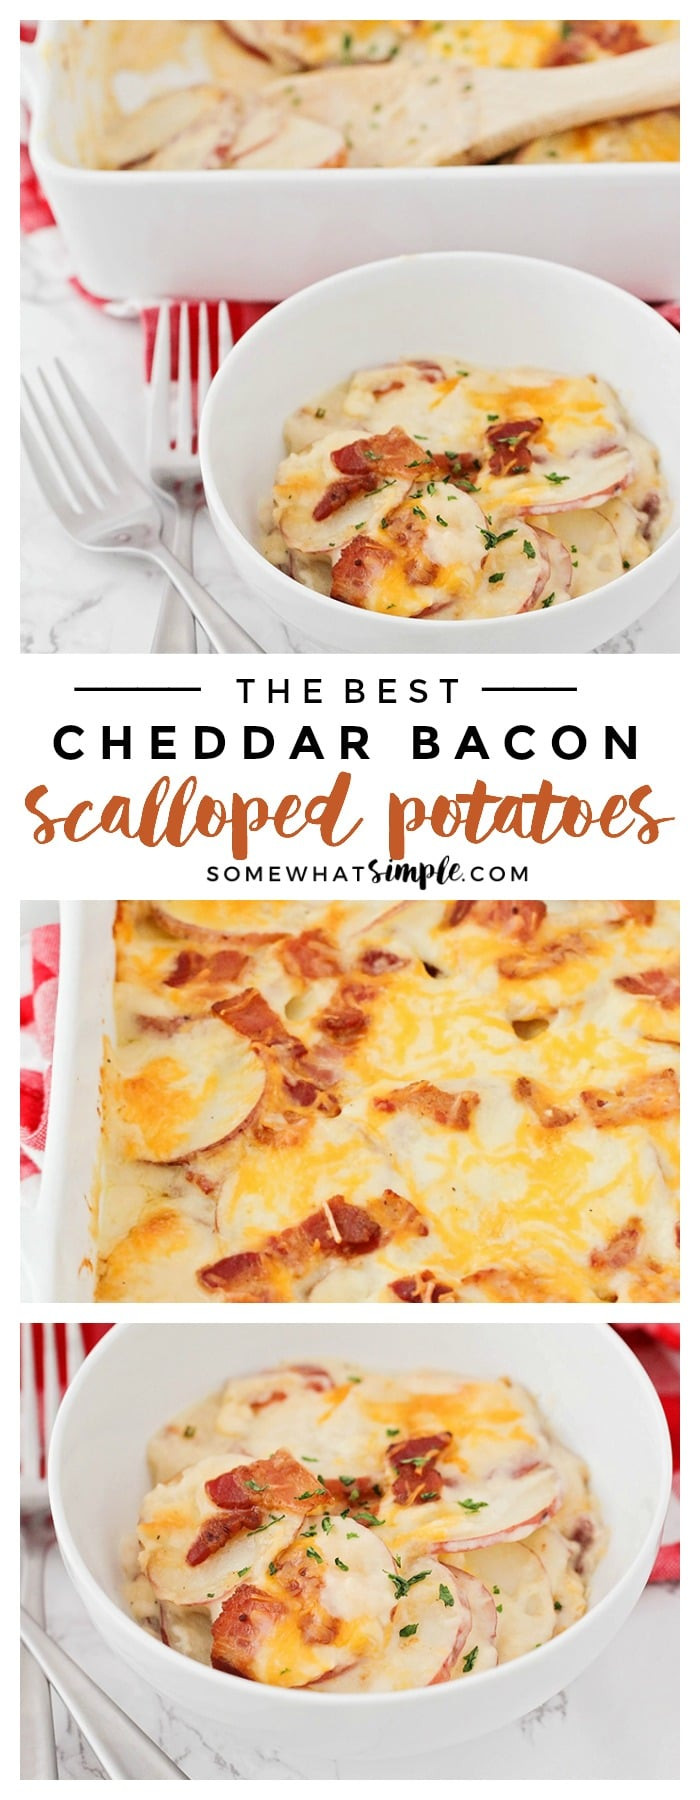 Scalloped Potatoes With Bacon
 The Best Cheddar Bacon Scalloped Potatoes Somewhat Simple